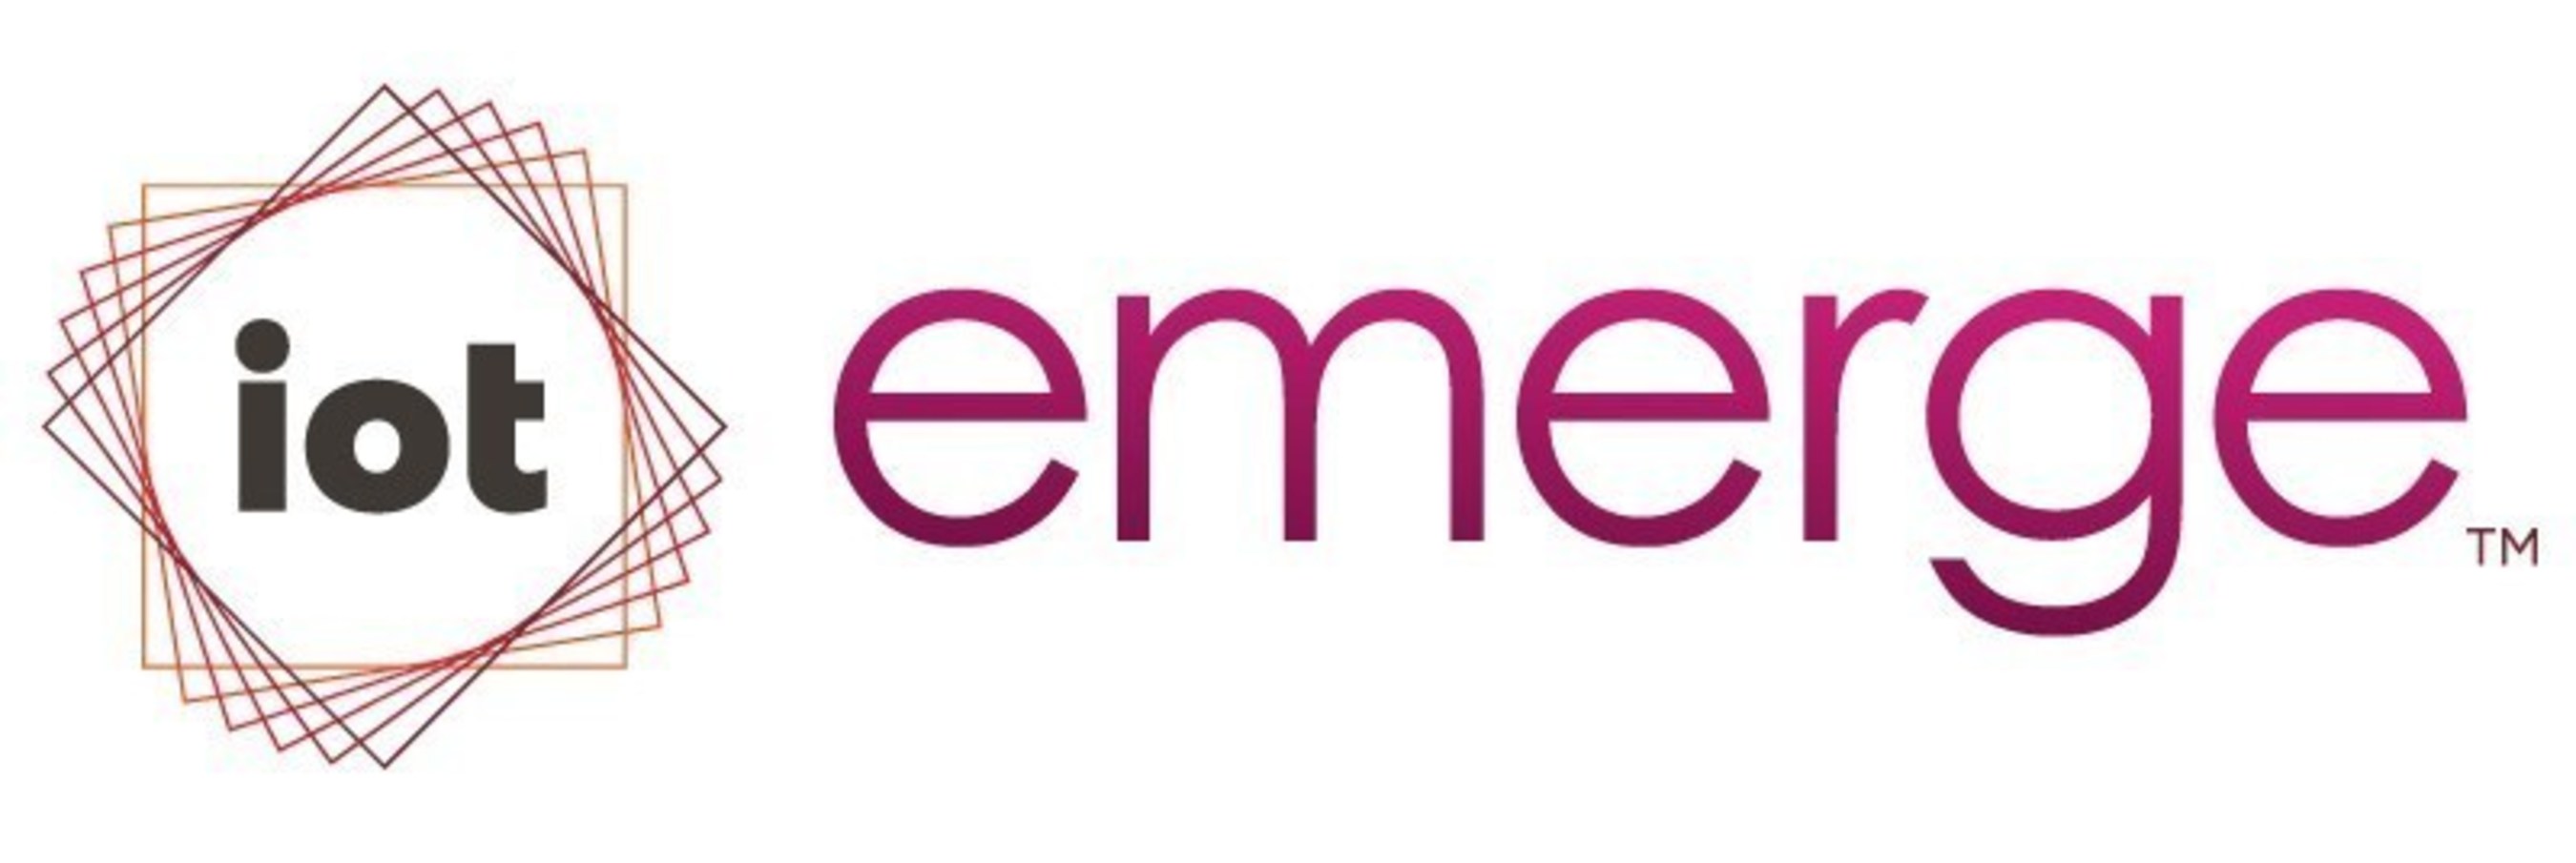 Internet of Things Thought Leaders to Keynote Penton's IoT Emerge Event